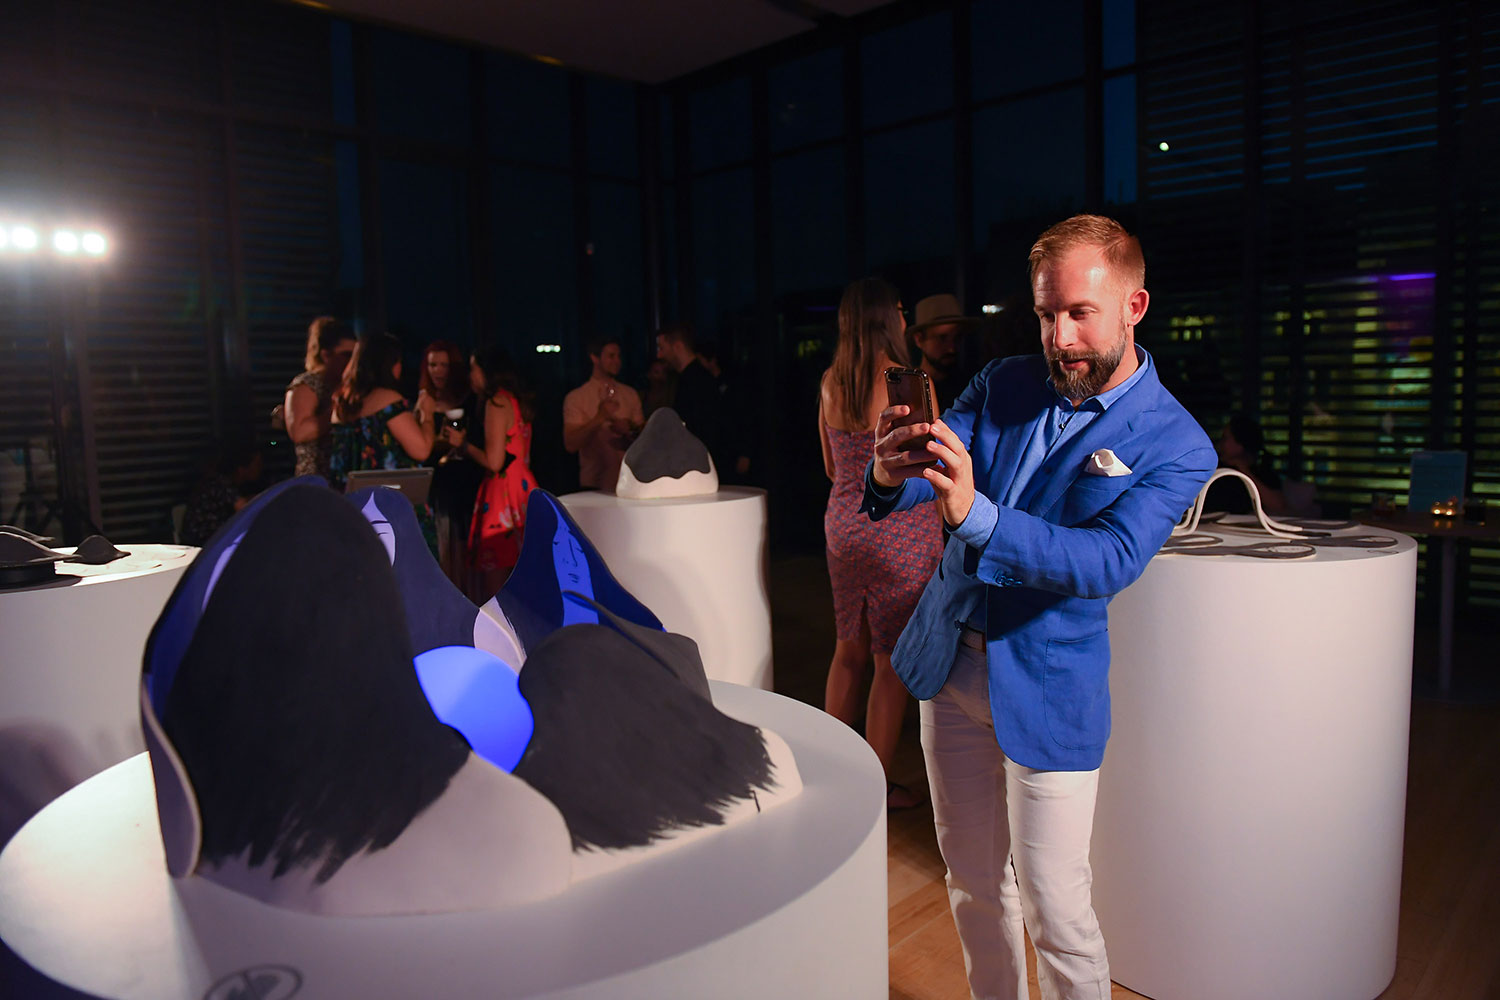 A party-goer in a blue suit jacket taking a photo of artwork by Ness Lee on a plinth